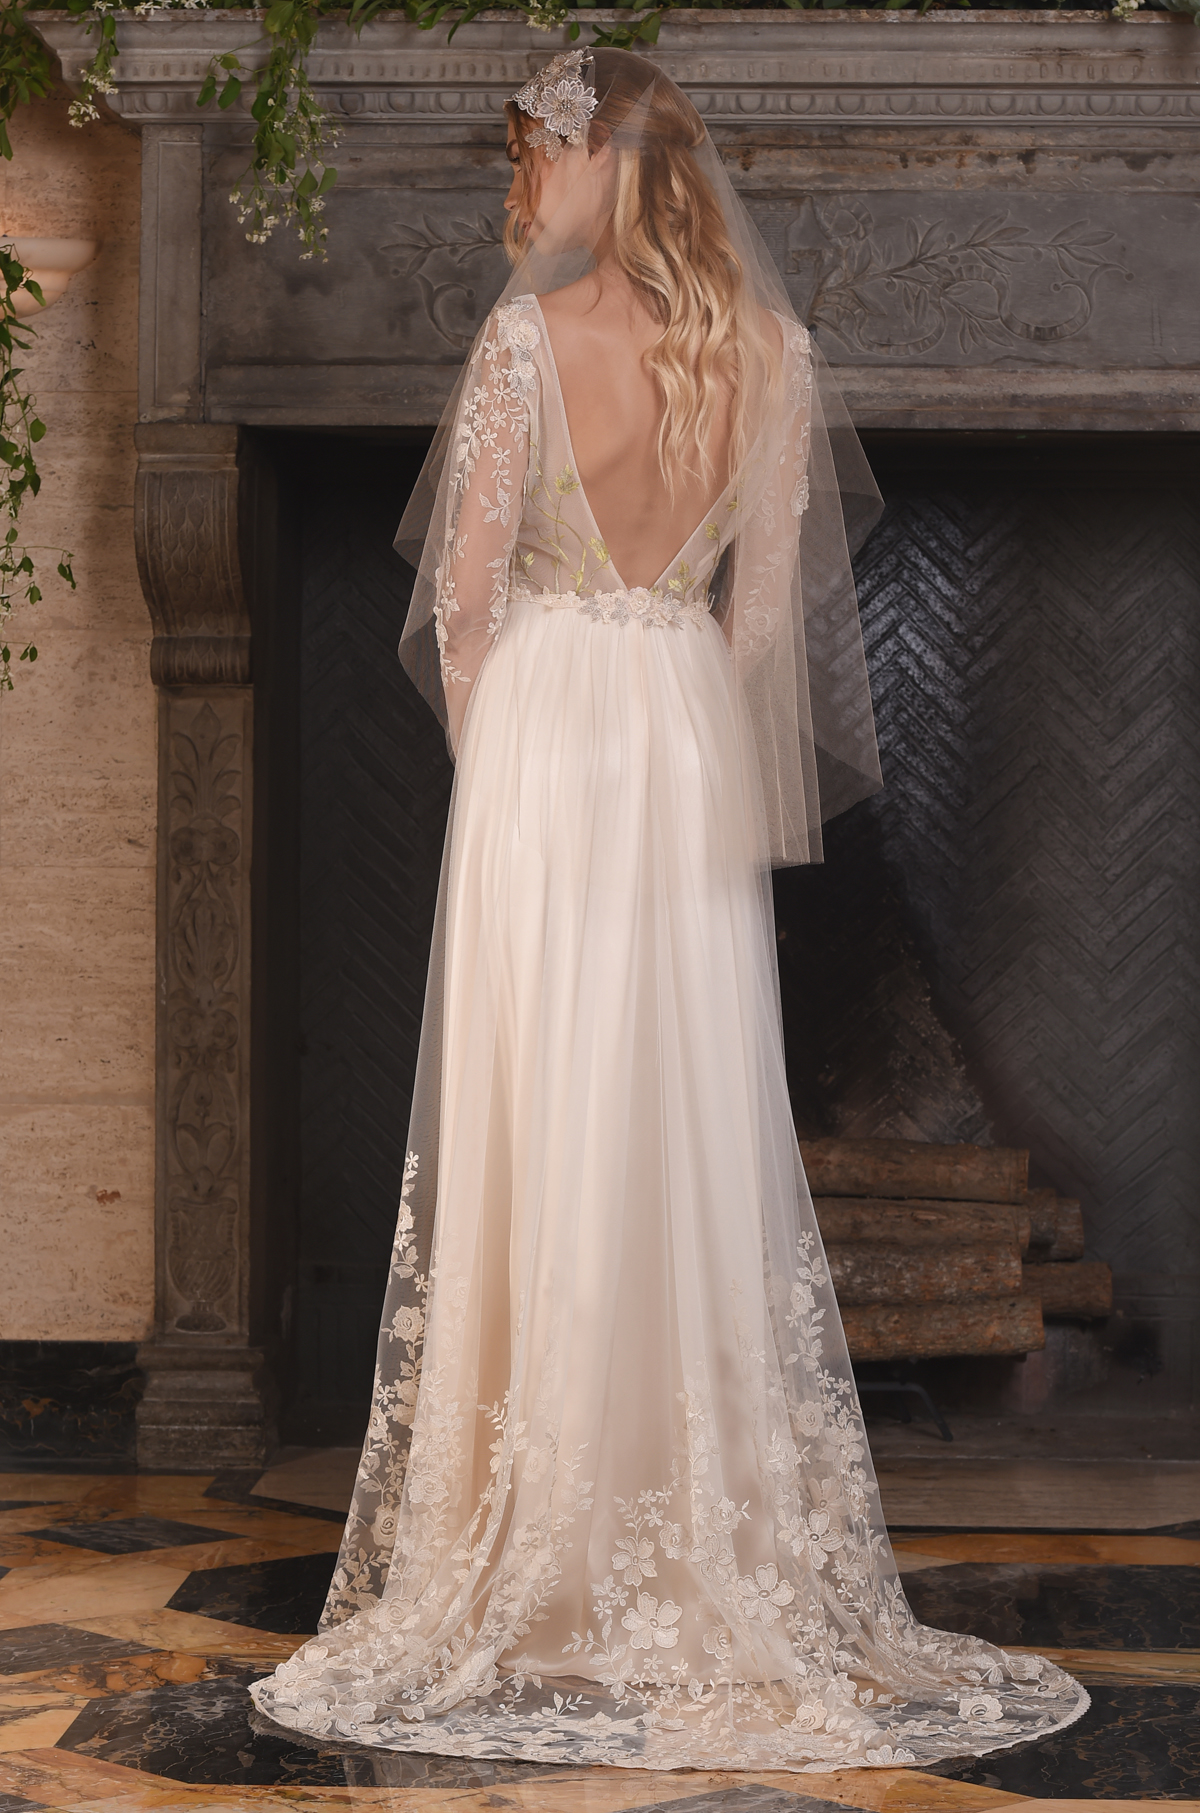 The Primavera gown, from Claire Pettibone's 'The Four Seasons' bridal couture collection for 2017.